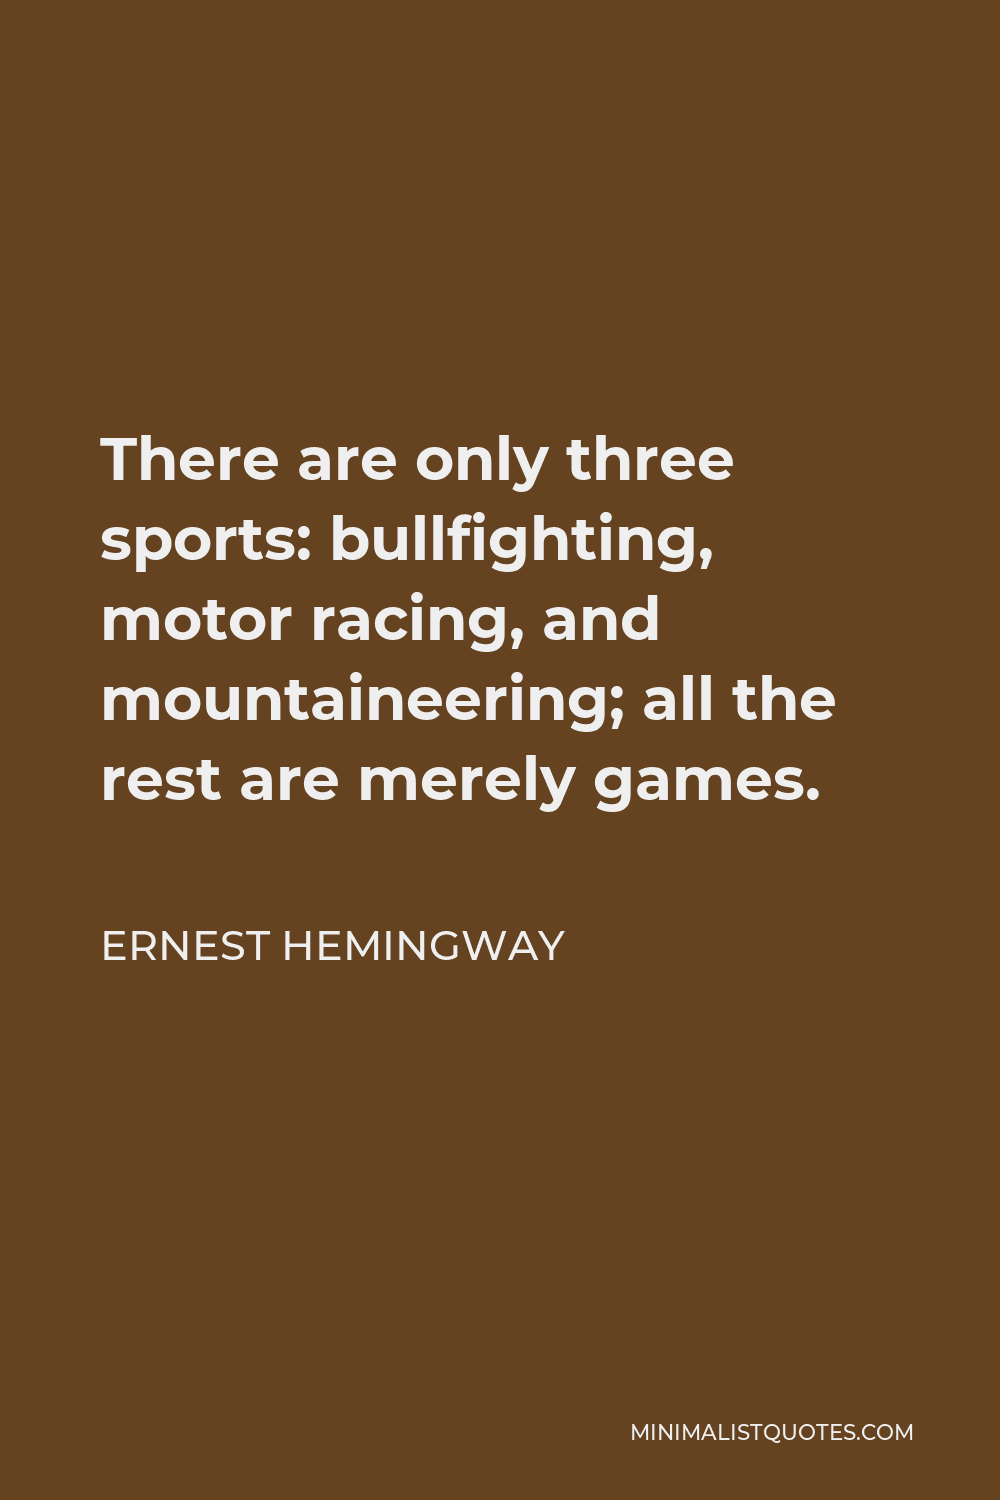 Ernest Hemingway Quote - There are only three sports: bullfighting, motor racing, and mountaineering; all the rest are merely games.